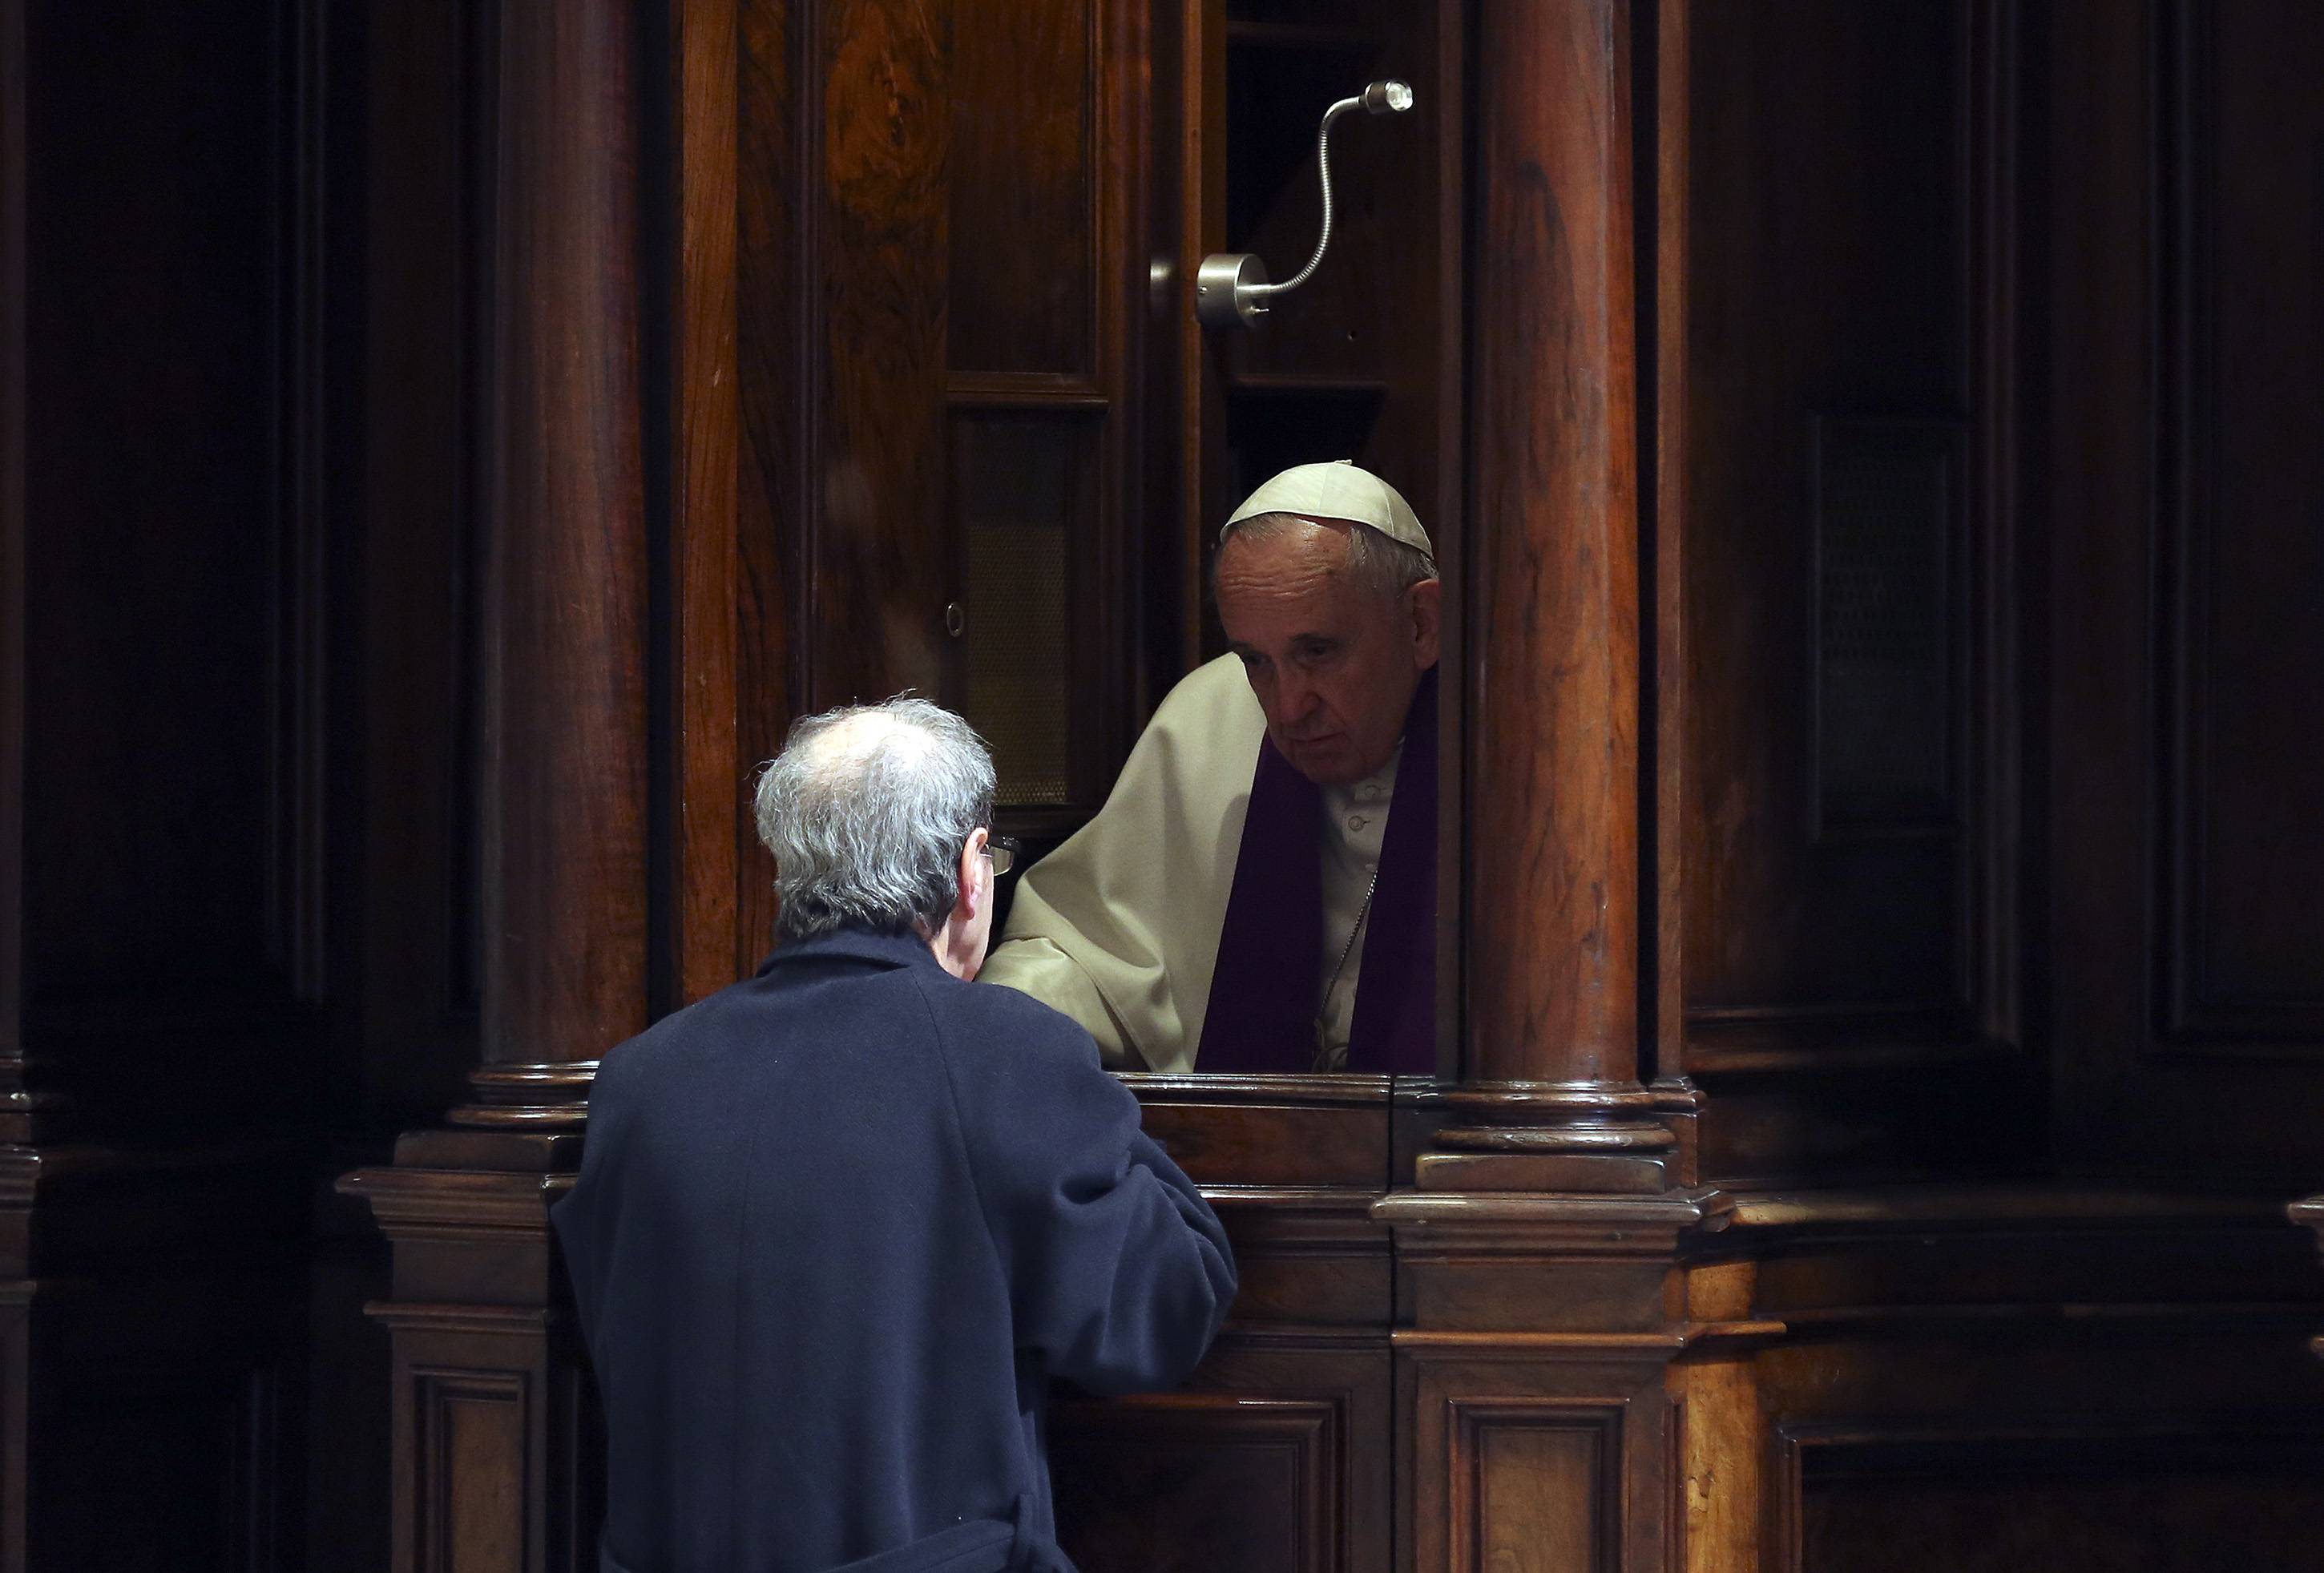 Pope Francis gives confession during the penitential celebration in St. Peter's Basilica at the Vatican, on March 13, 2015. Pope Francis declared an extraordinary jubilee year to celebrate the 50th anniversary of a landmark Vatican council and said the Church was bound to continue its reforming work. The year will be dedicated to the theme of mercy and begin on December 8th, the date the Vatican II council closed in 1965, Francis said in St Peter's cathedral on the second anniversary of his election as pope. AFP PHOTO POOL / ALESSANDRO BIANCHI